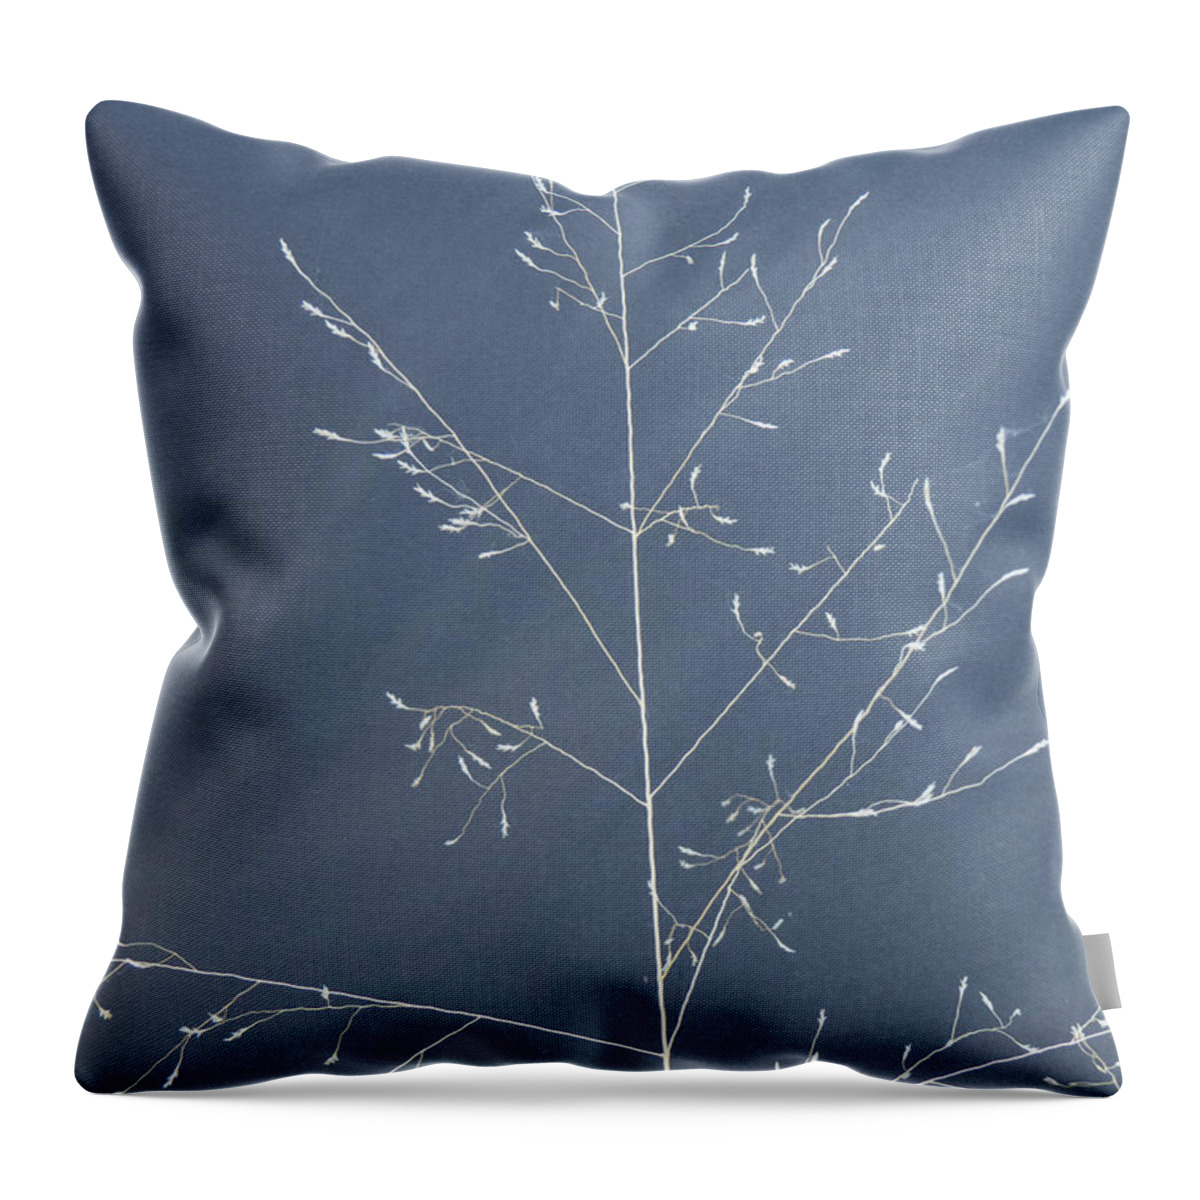 Photograph Throw Pillow featuring the photograph Wispy Stems of Grass by Christy Garavetto